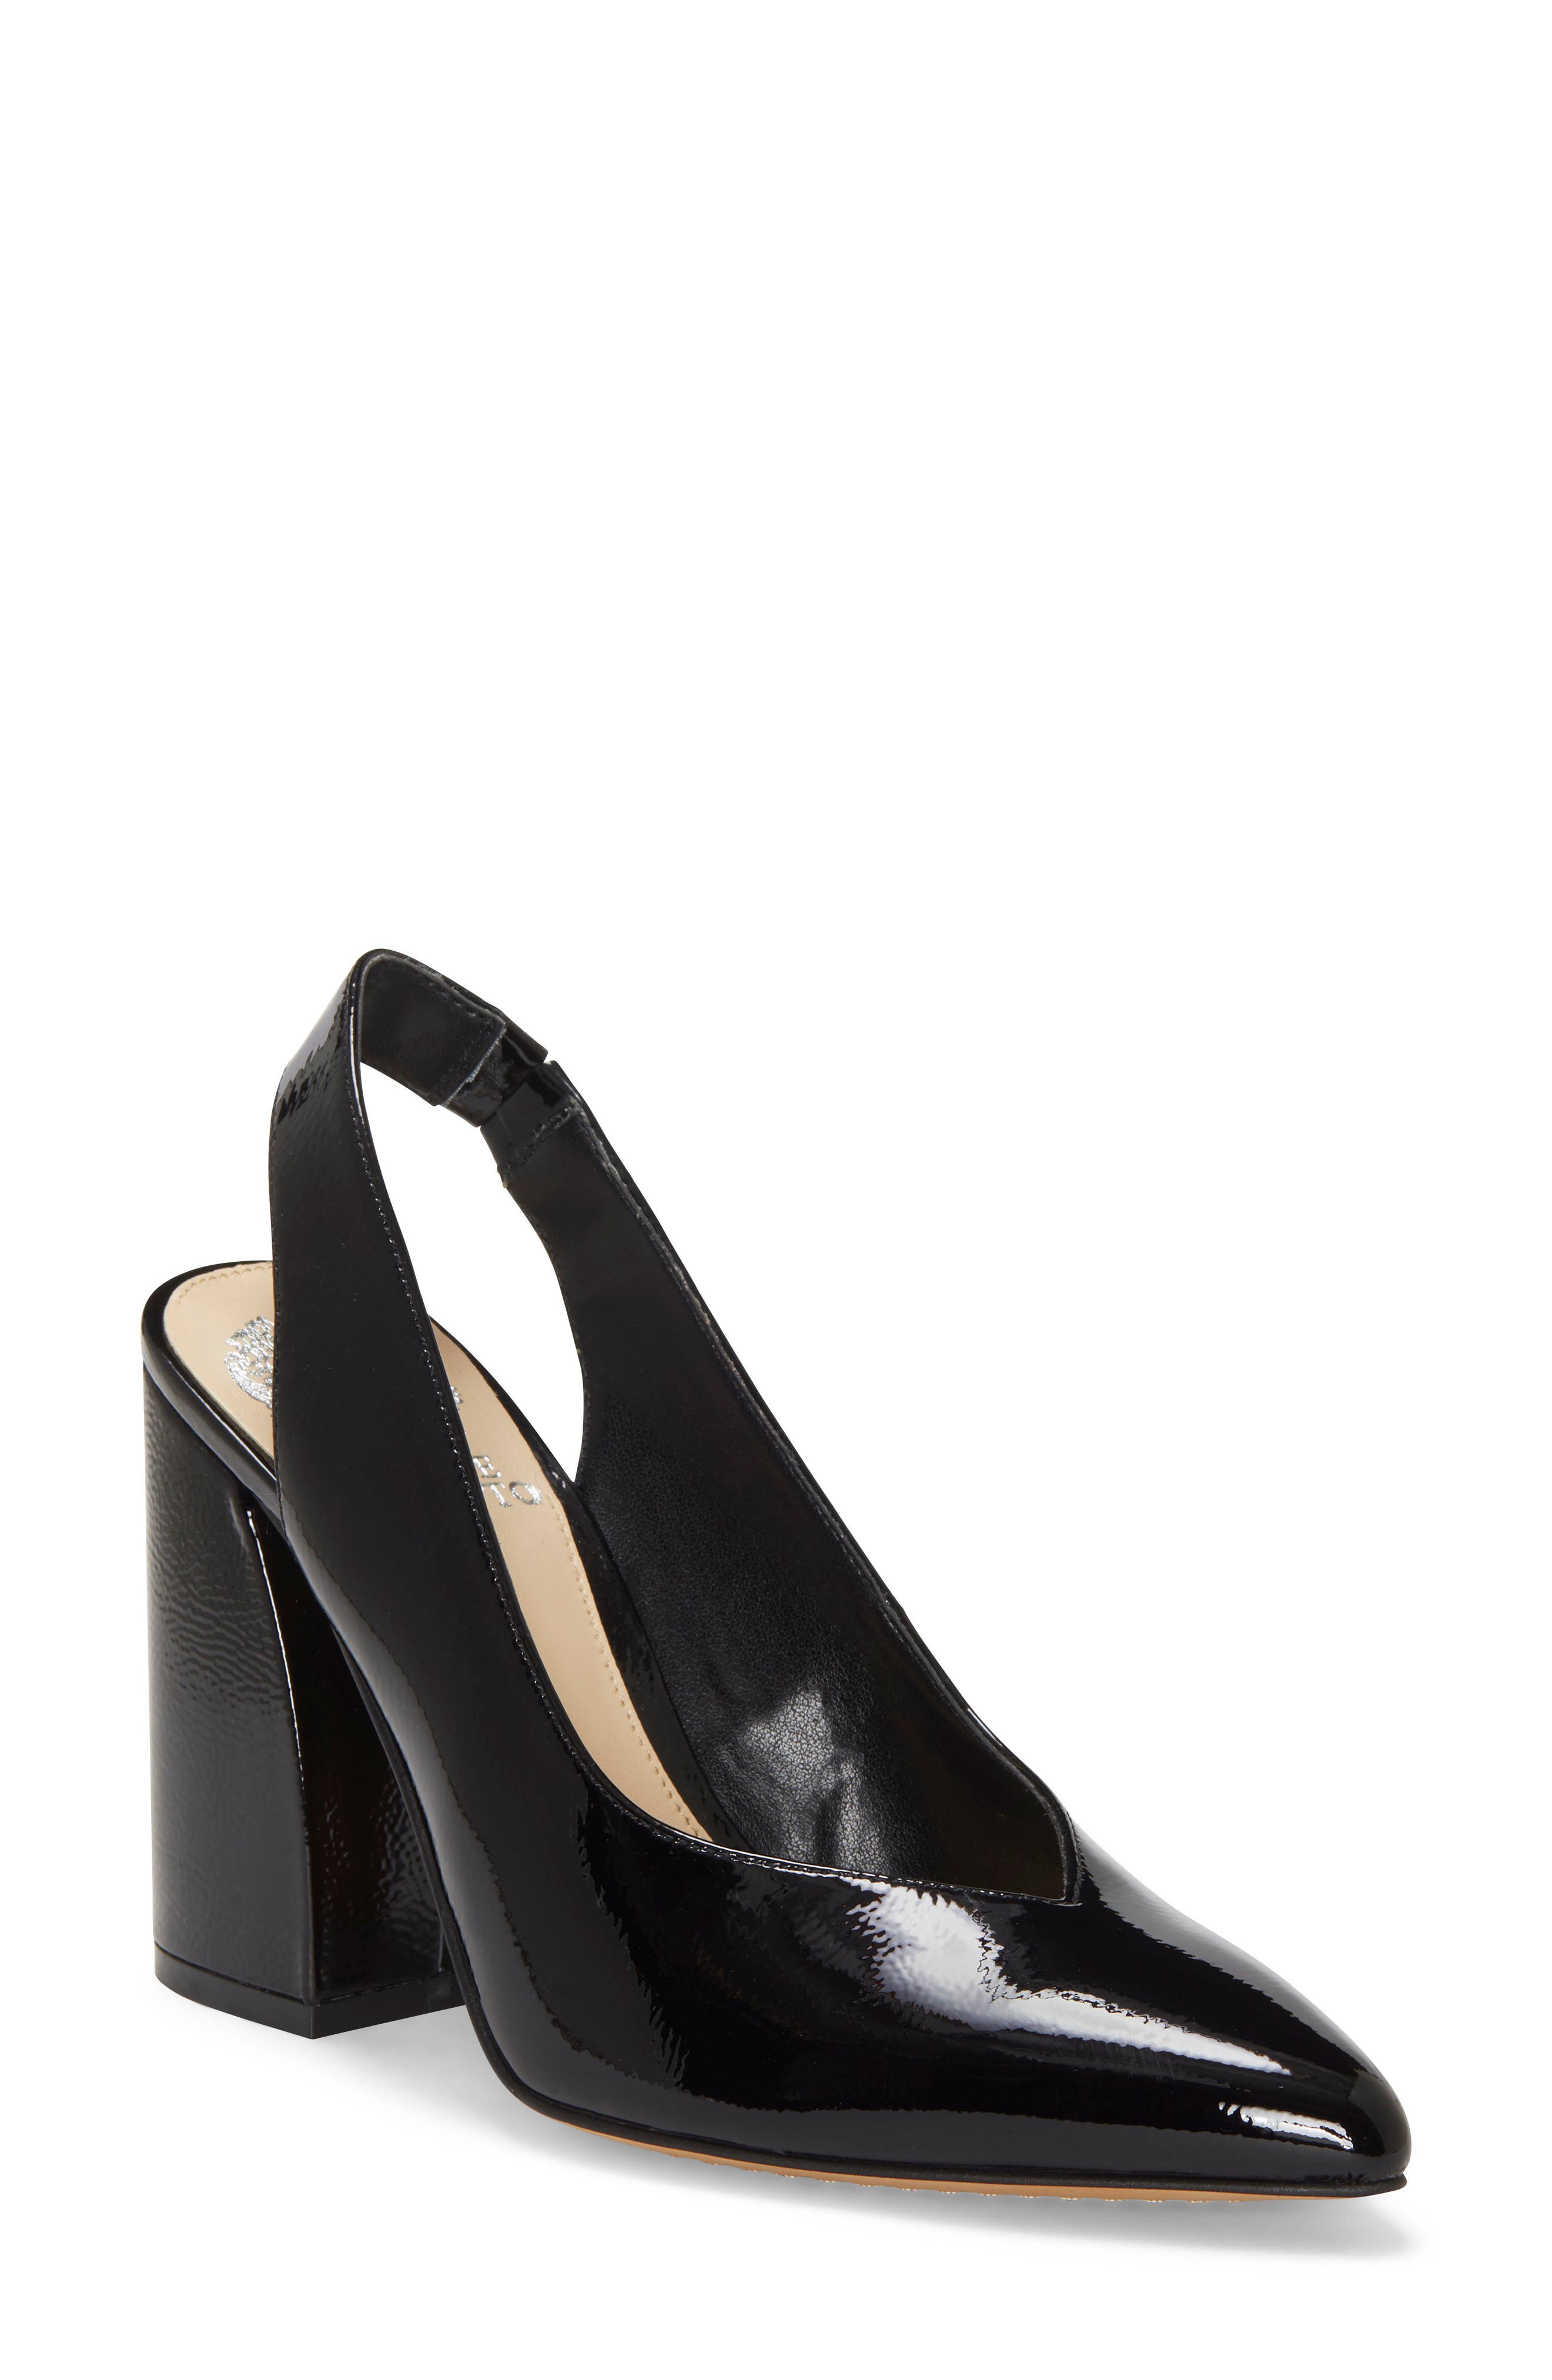 pointed slingback